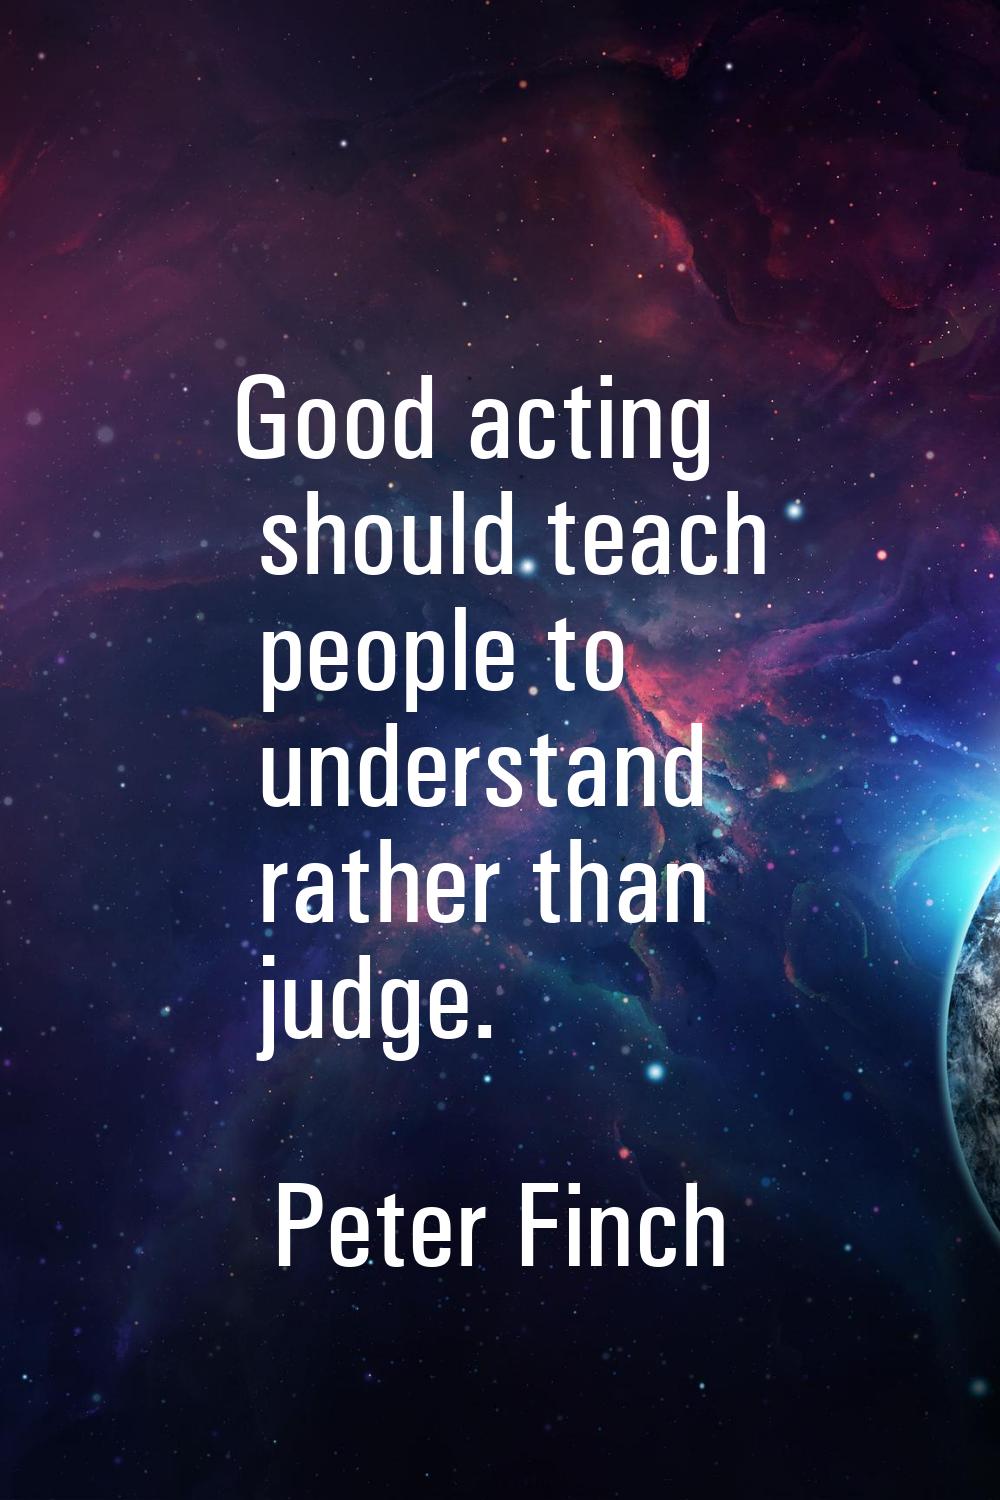 Good acting should teach people to understand rather than judge.